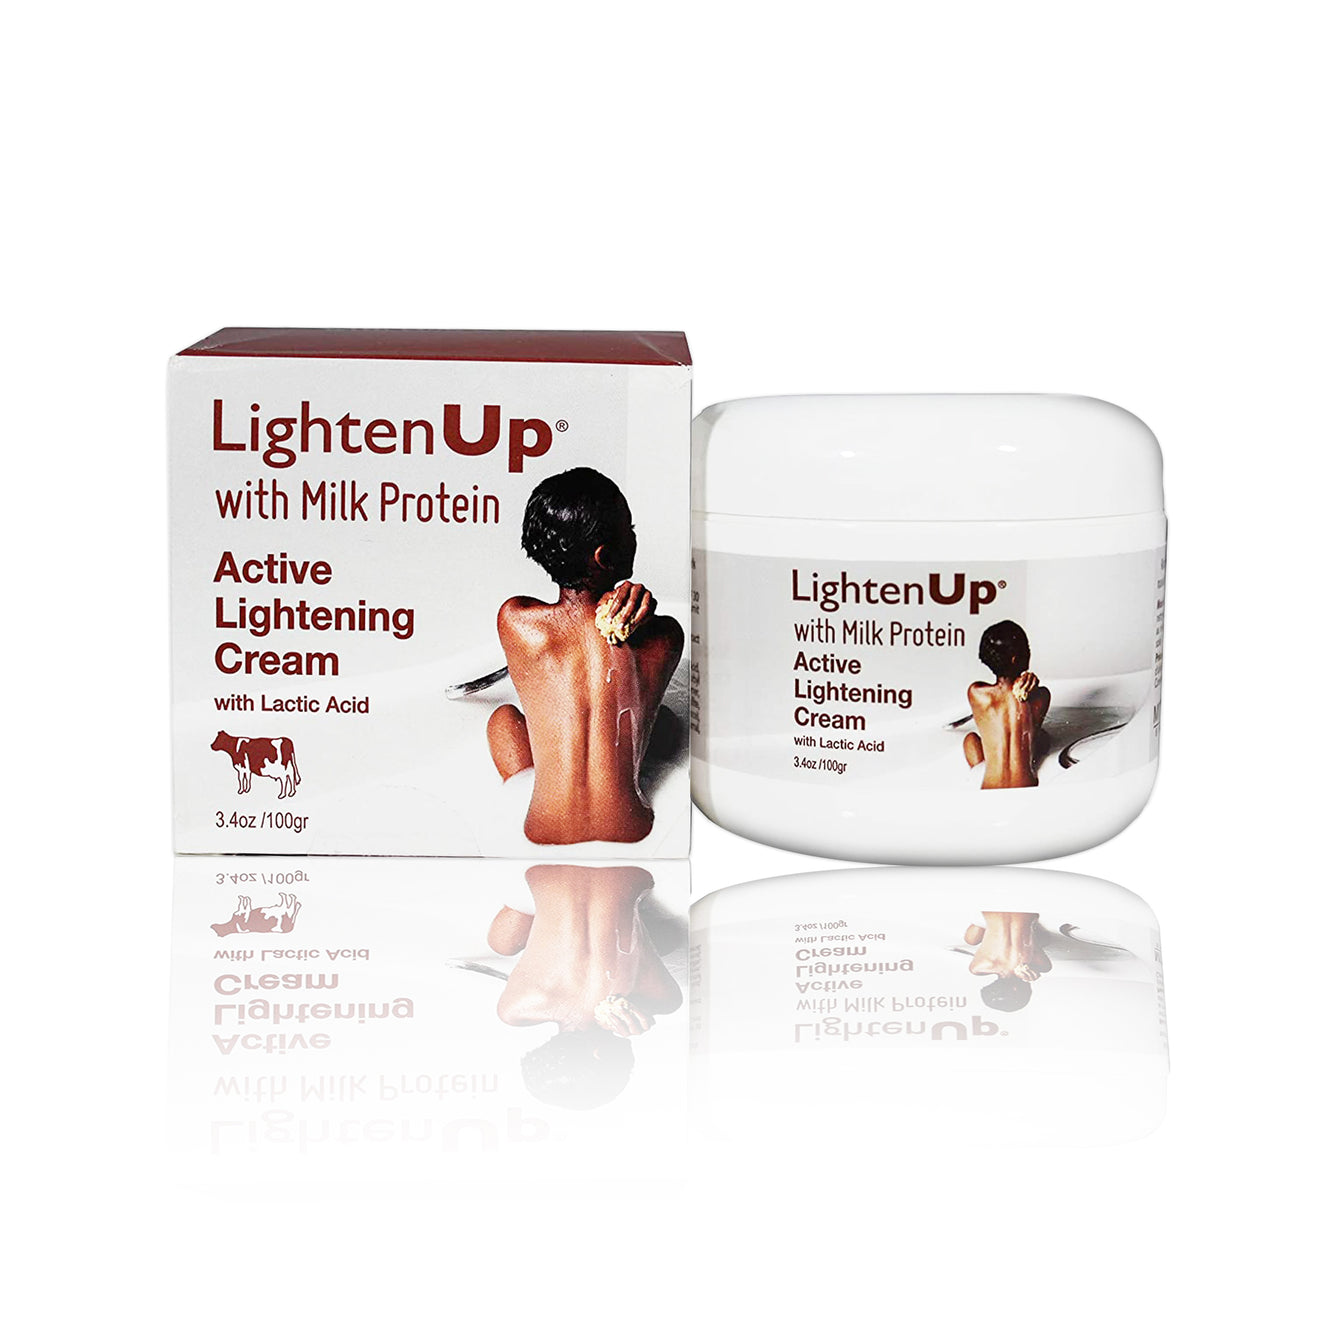 Omic Lightenup Lactic Acid Active Lightening Cream - 1004 / 3.5 Oz Mitchell Brands - Mitchell Brands - Skin Lightening, Skin Brightening, Fade Dark Spots, Shea Butter, Hair Growth Products